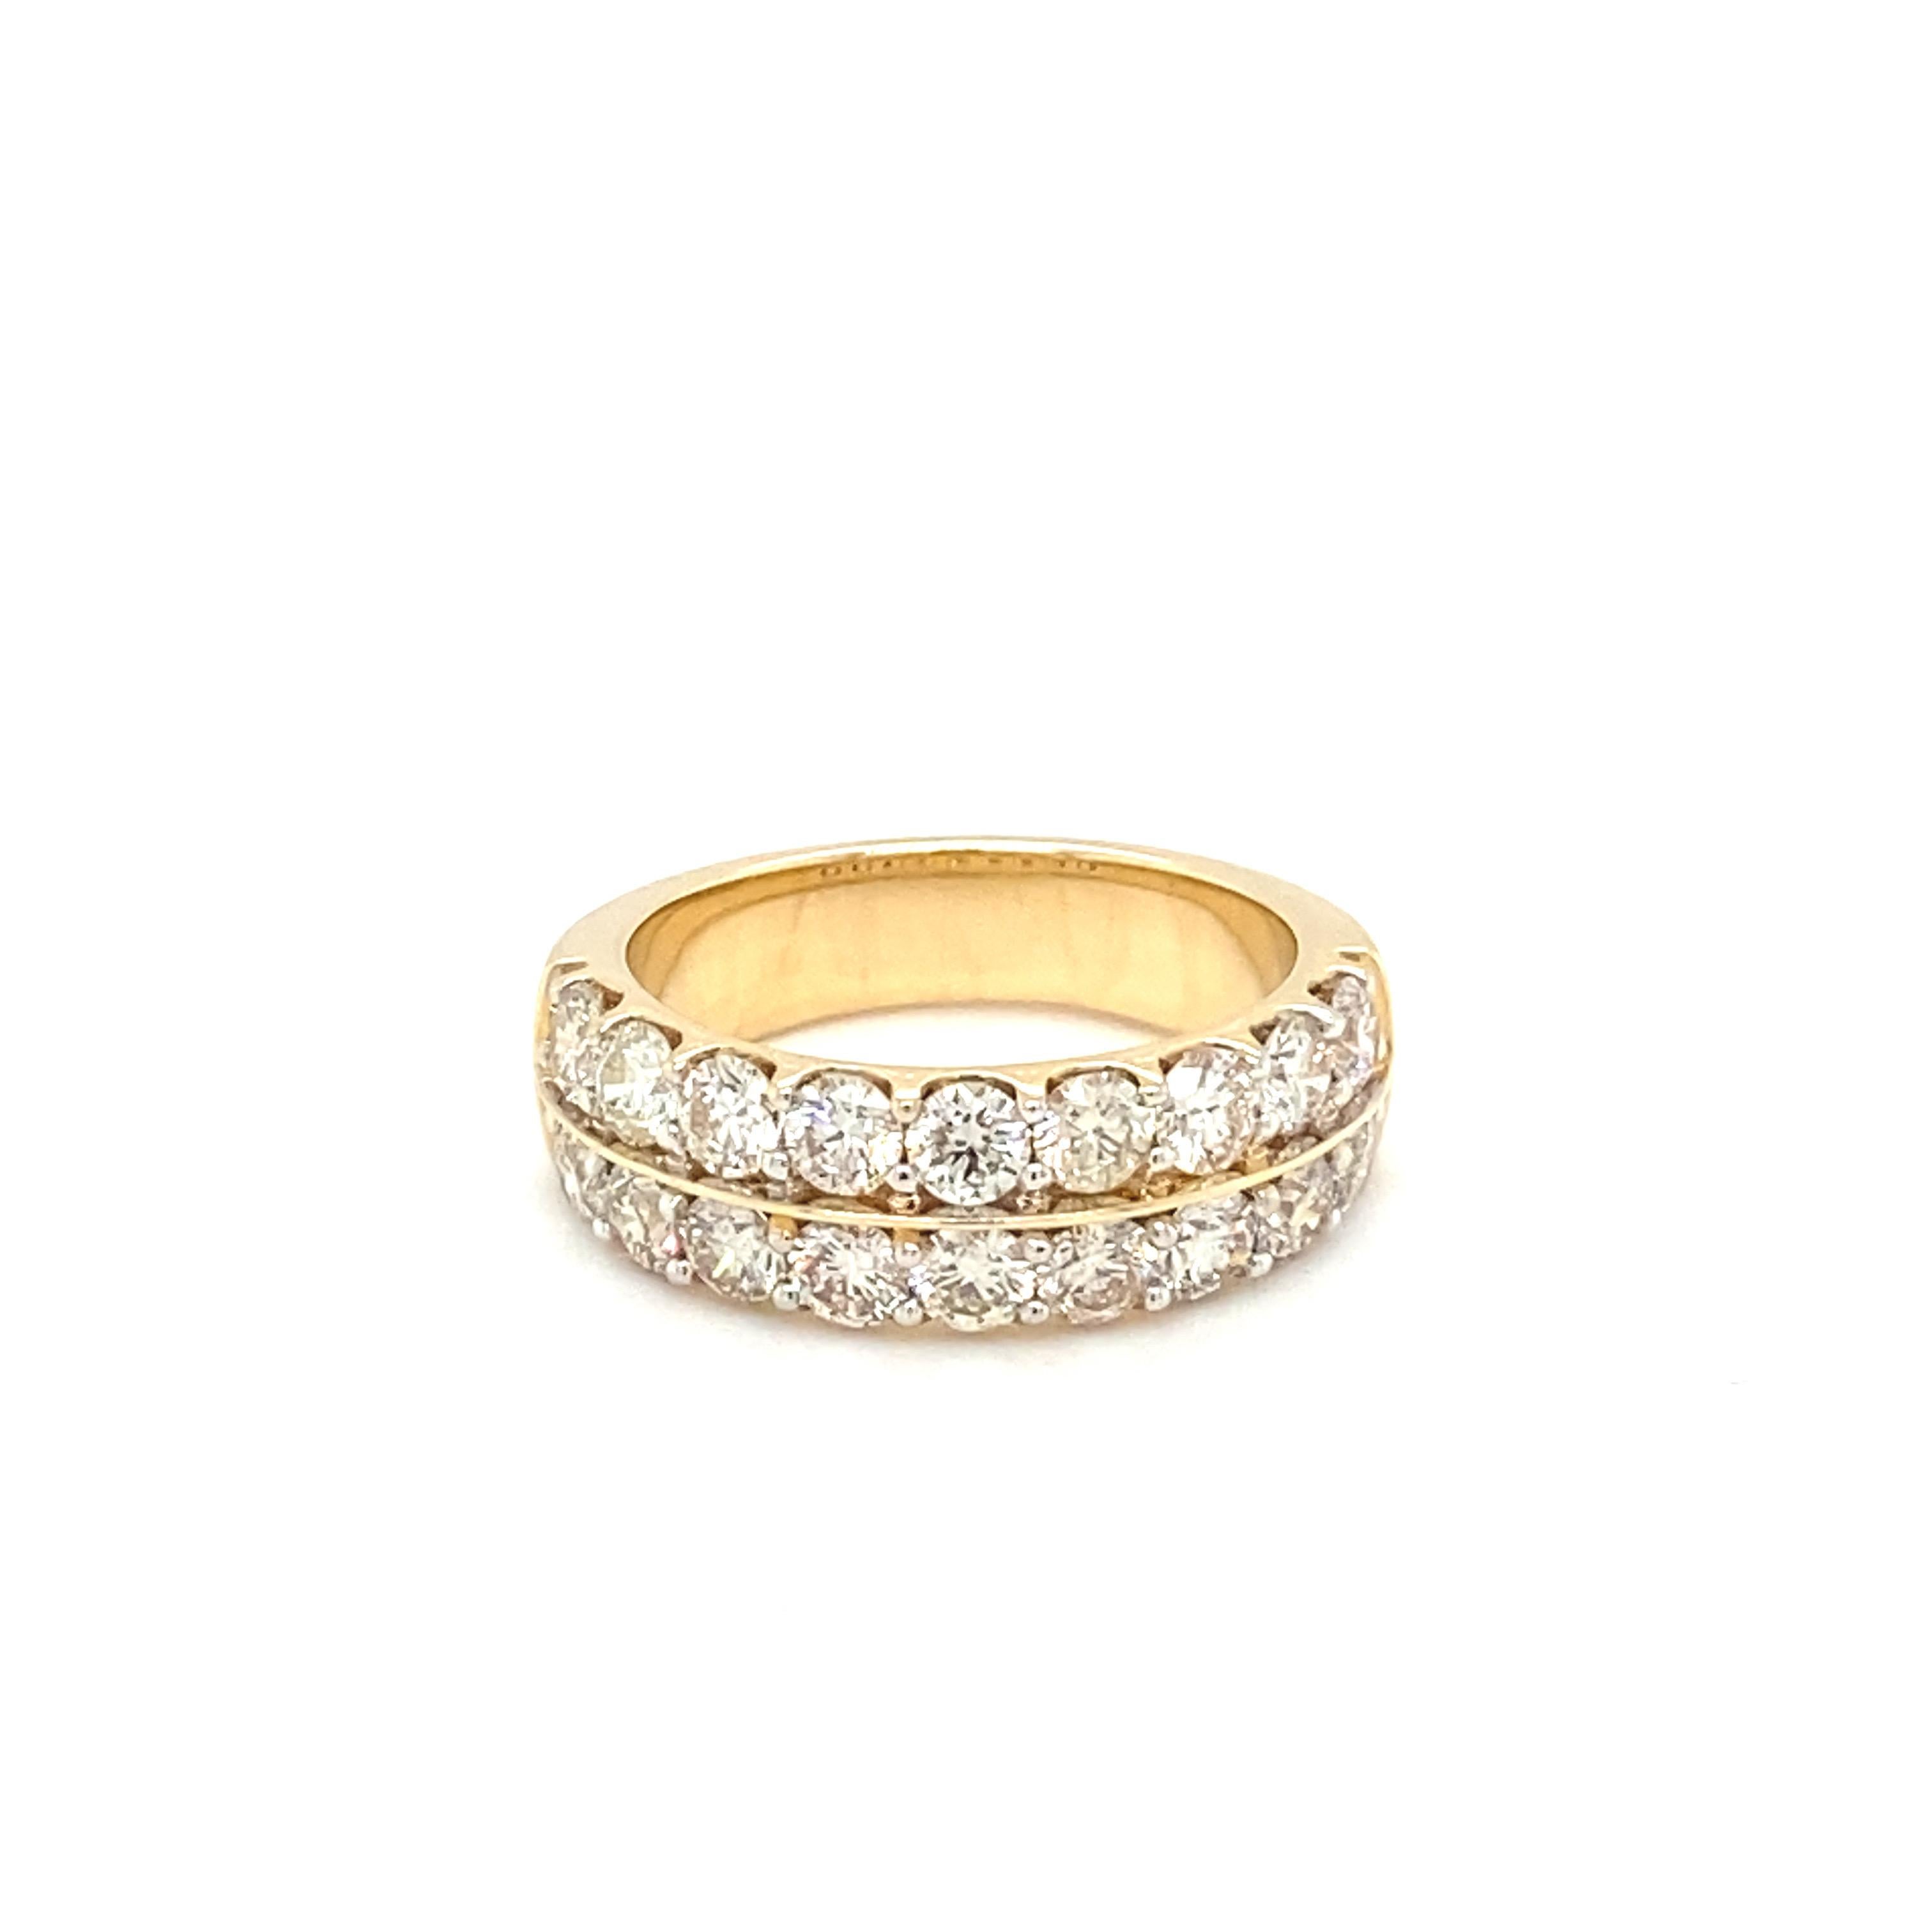 This beautiful band showcases double row pave setting of brilliant cut white diamonds. Timeless band features halfway diamond with classic shared prong. 
Diamond: 3.00 carat White
Gold: 14K Yellow 
Size: 7 Resizable
